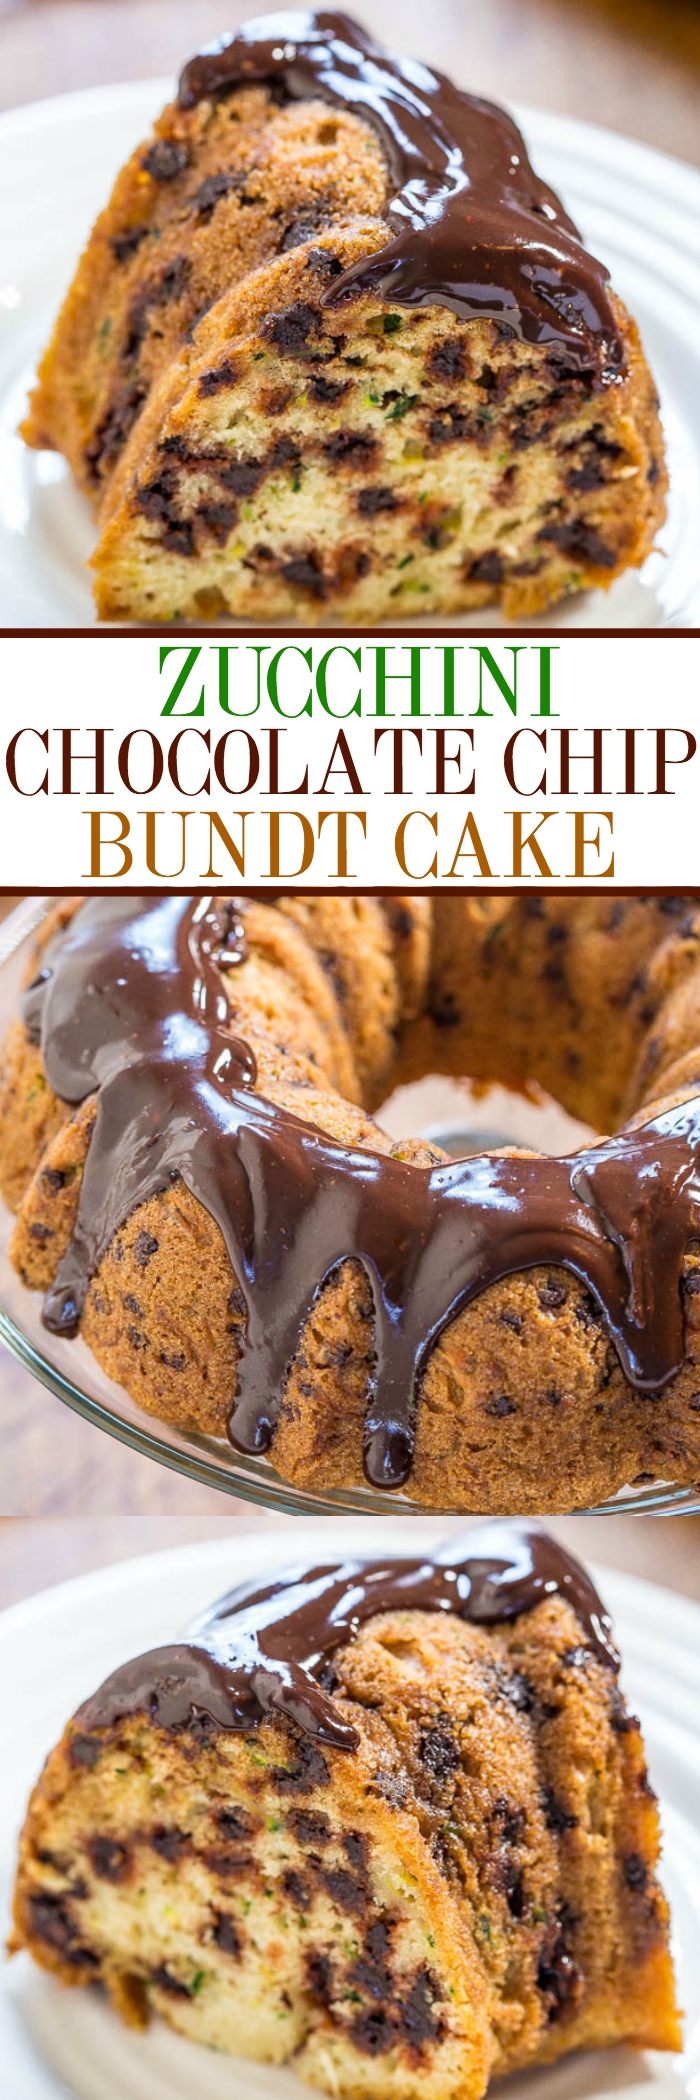 Chocolate Chip Zucchini Bundt Cake with Chocolate Ganache — The best zucchini cake ever!! Soft, moist, and you can't even taste the zucchini! Tastes like a yellow bakery cake drenched in chocolate!!